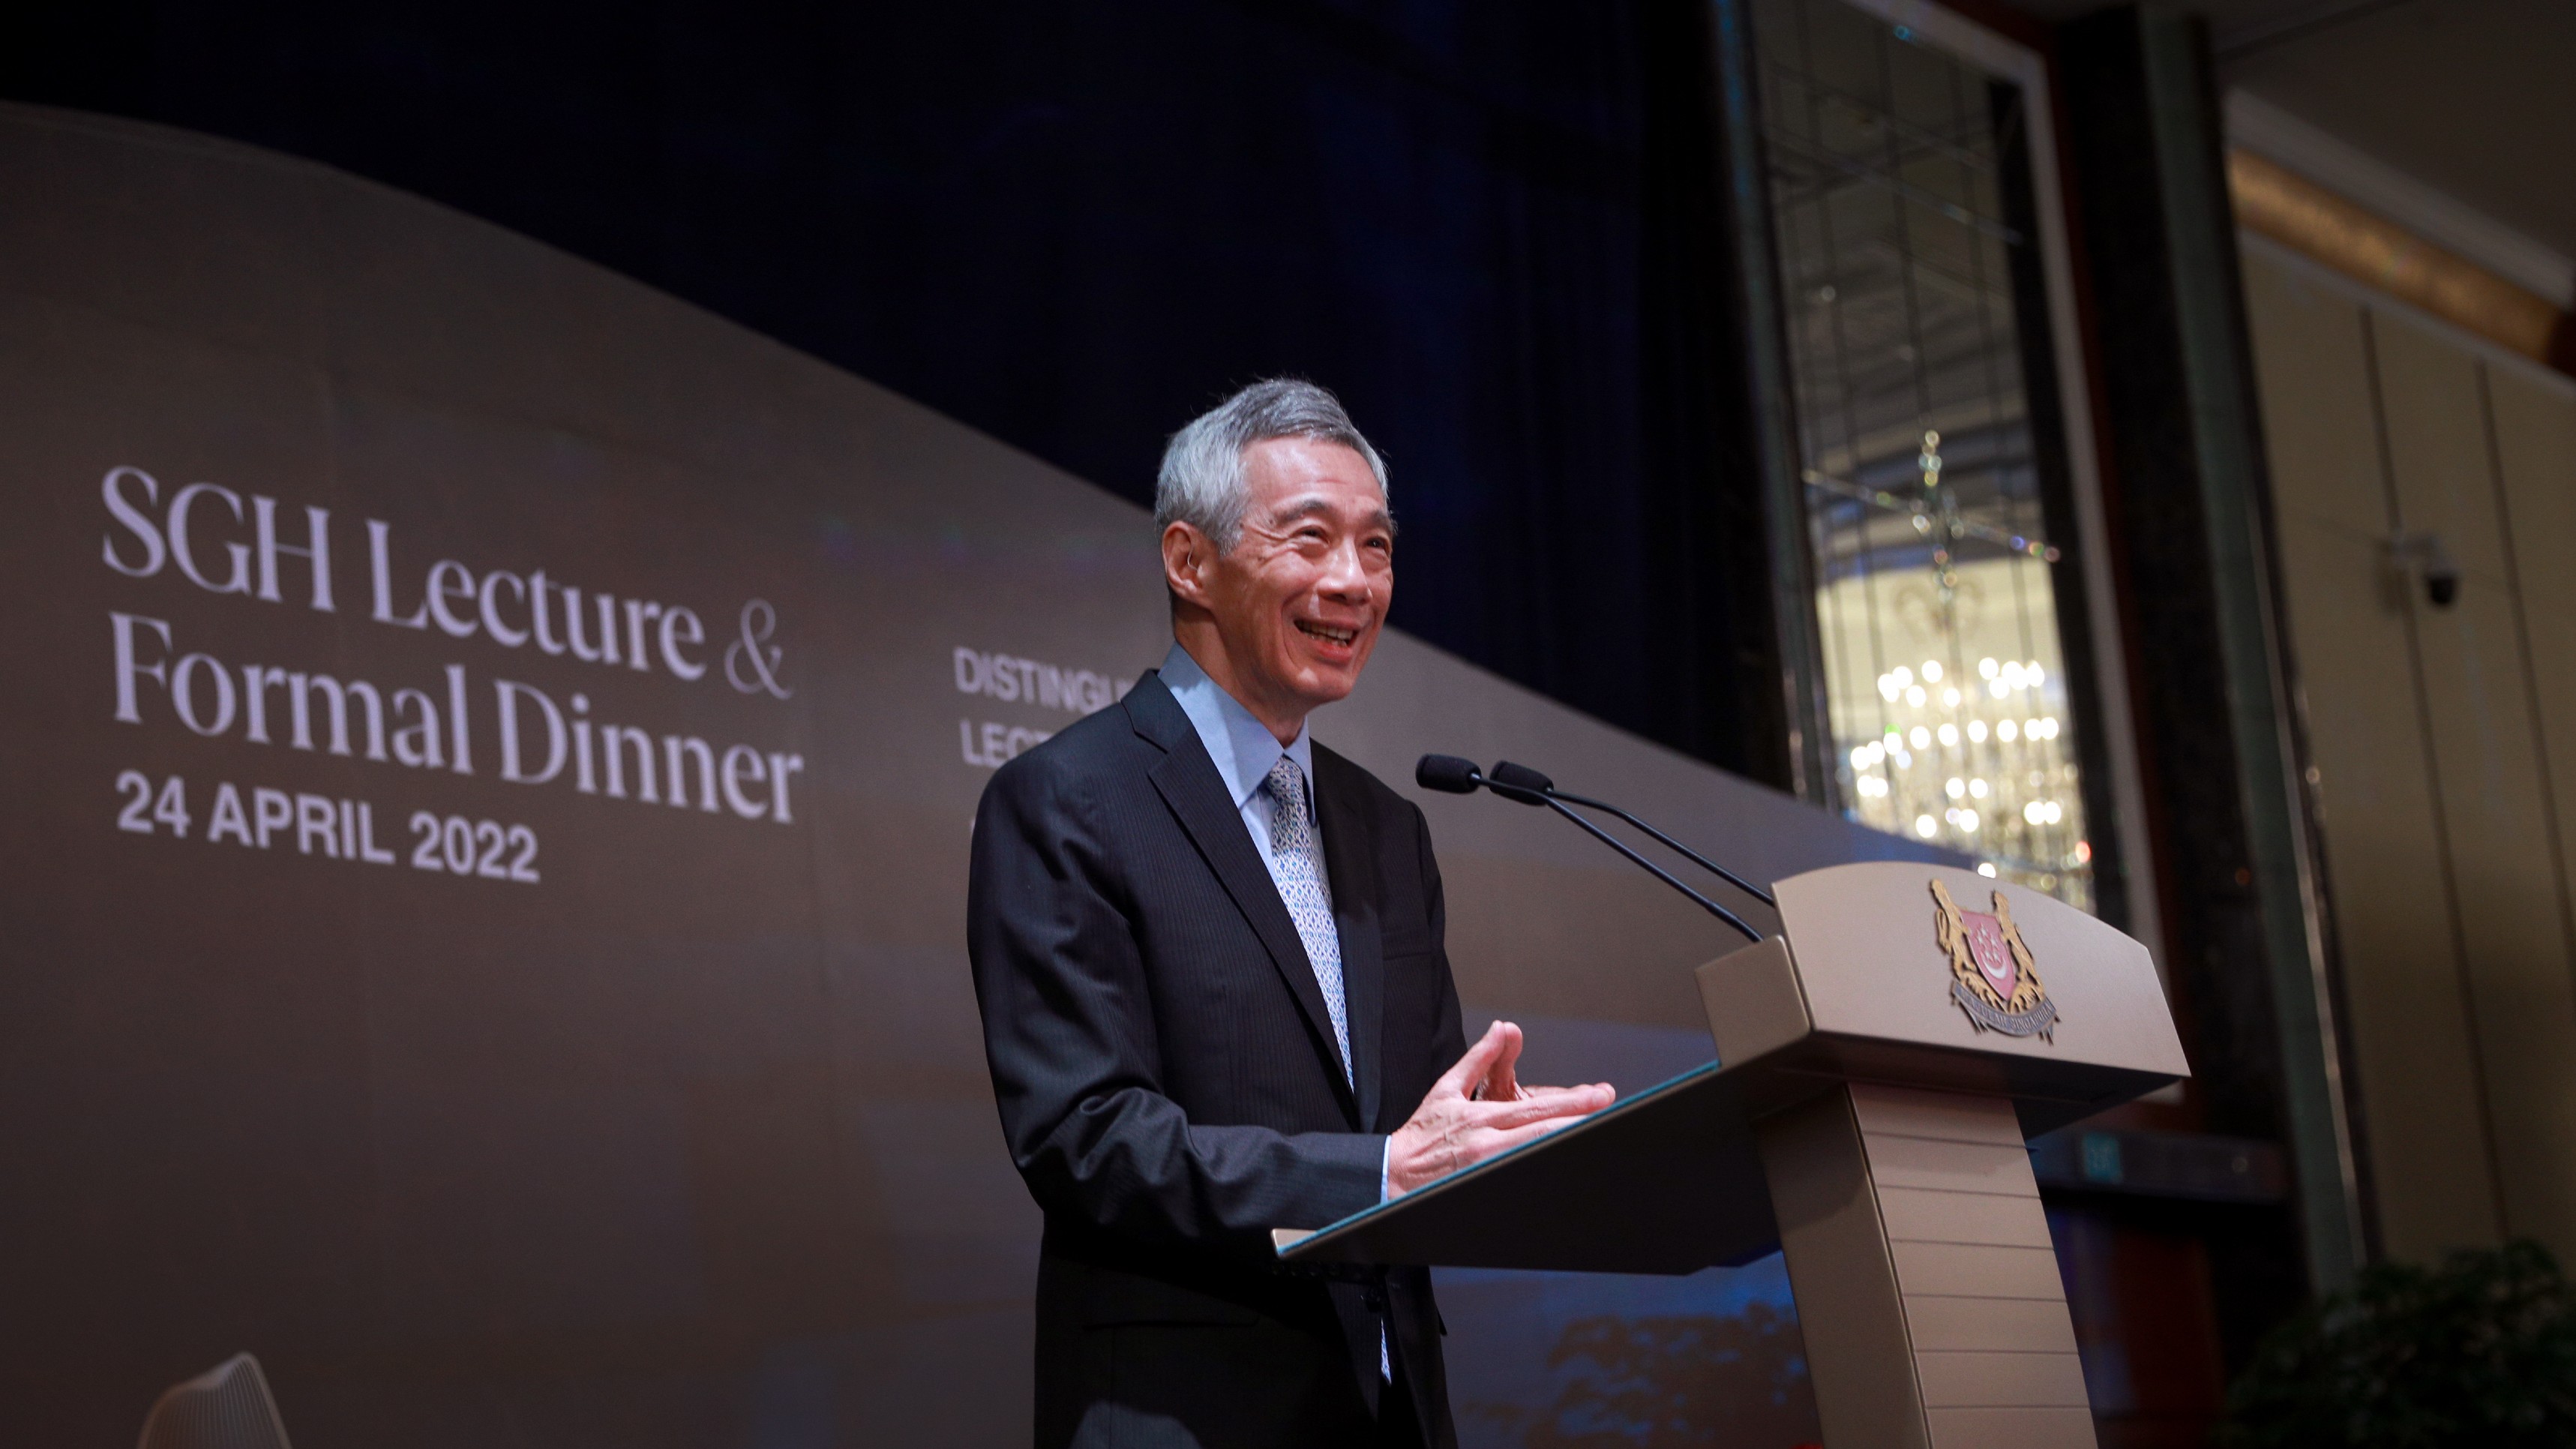 PM Lee SGH Lecture feature jpg